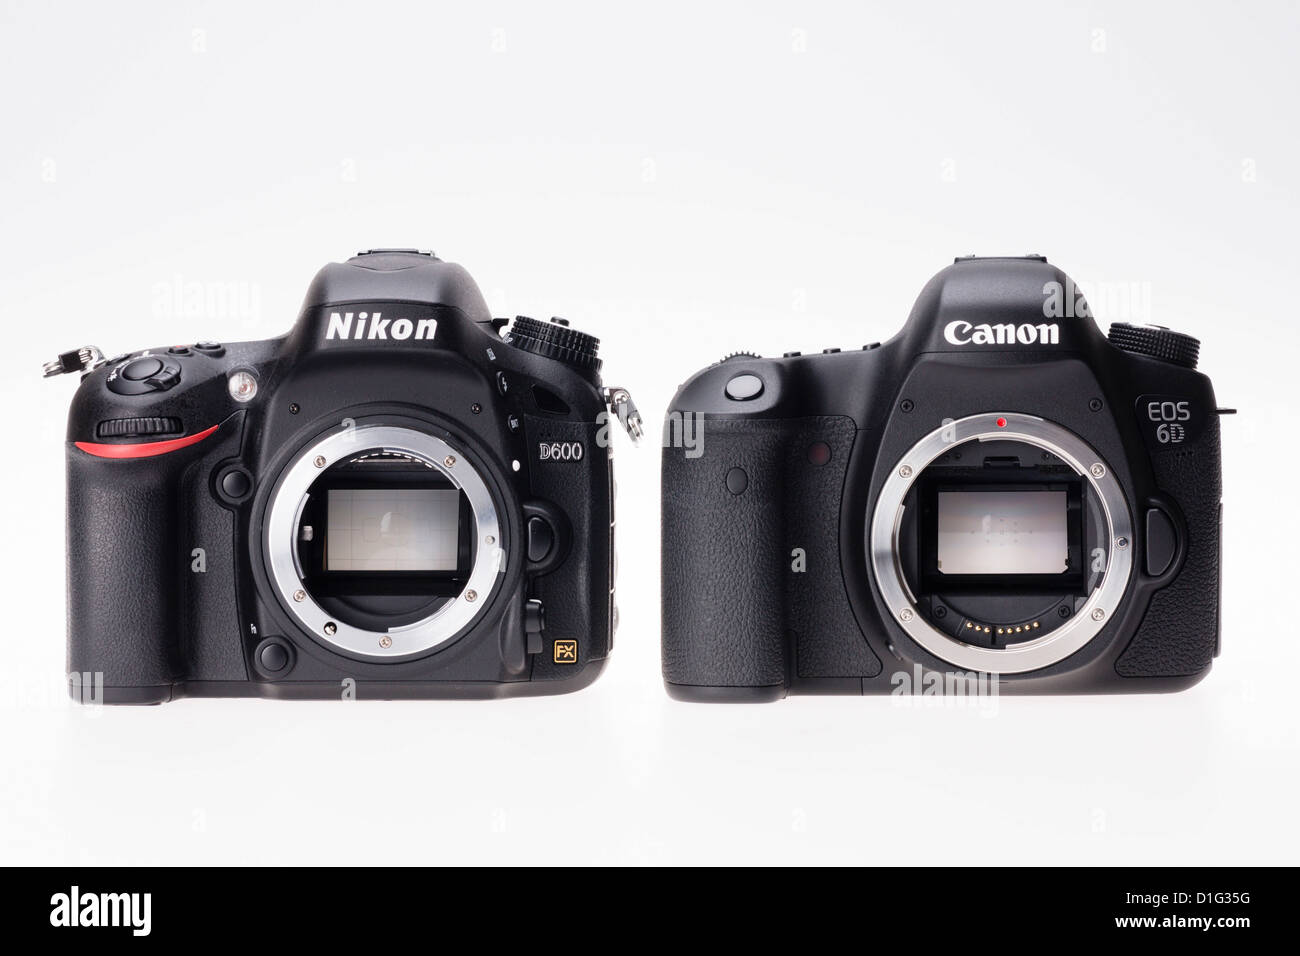 Photographic equipment - the Nikon D600 and Canon 6D (2012) bodies side by side, competing low priced full format camaeras. Stock Photo